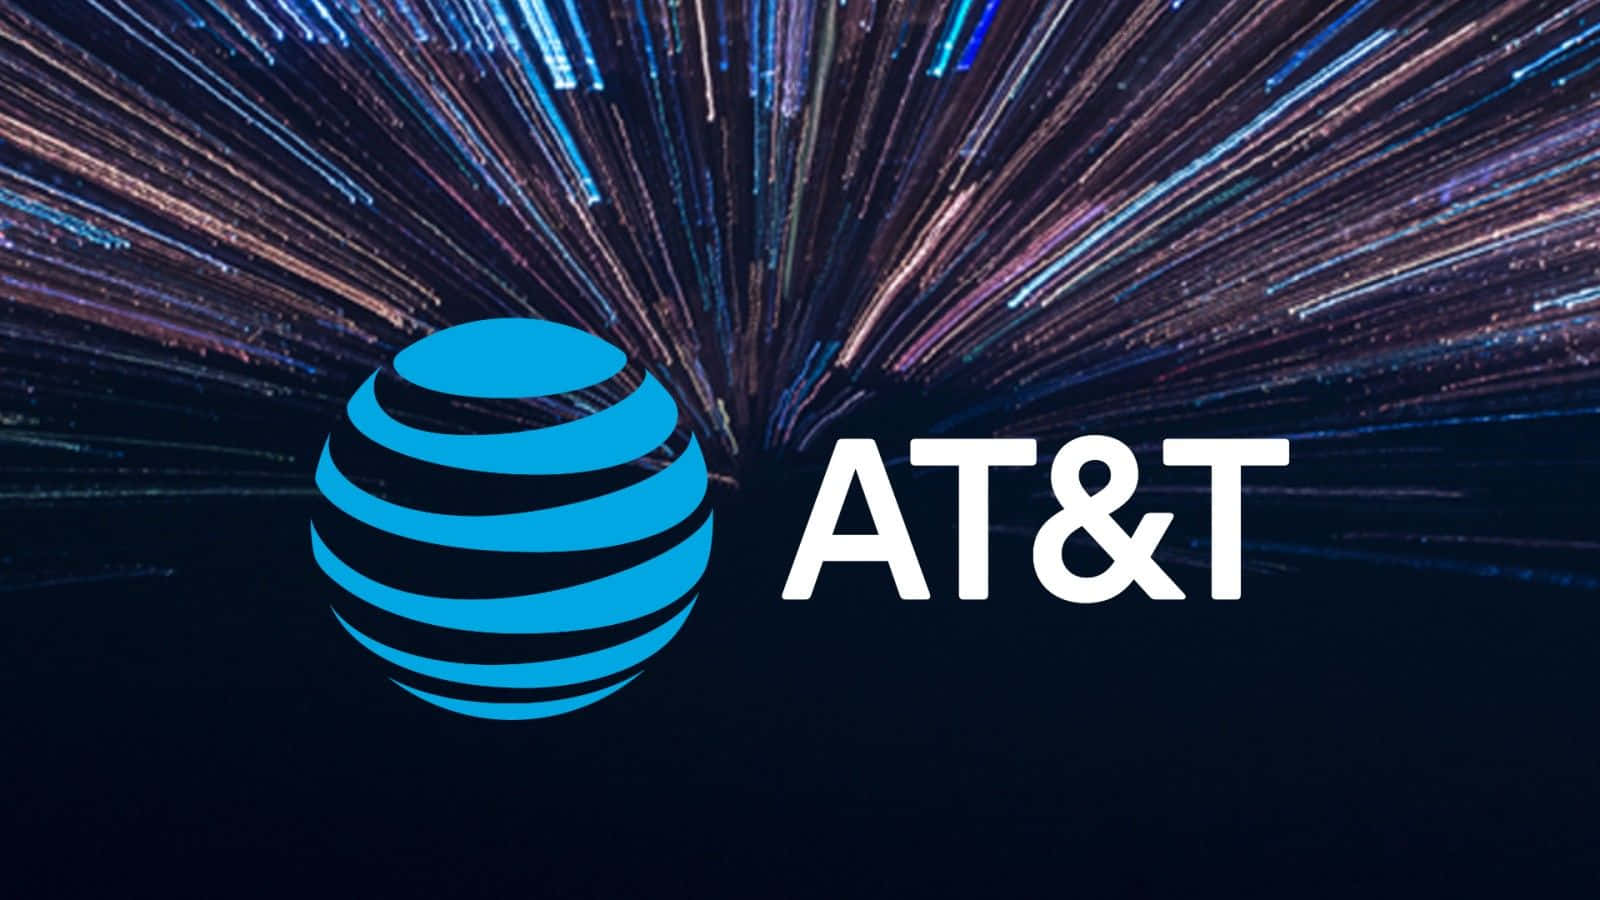 At&t Logo With A Blue Background Wallpaper